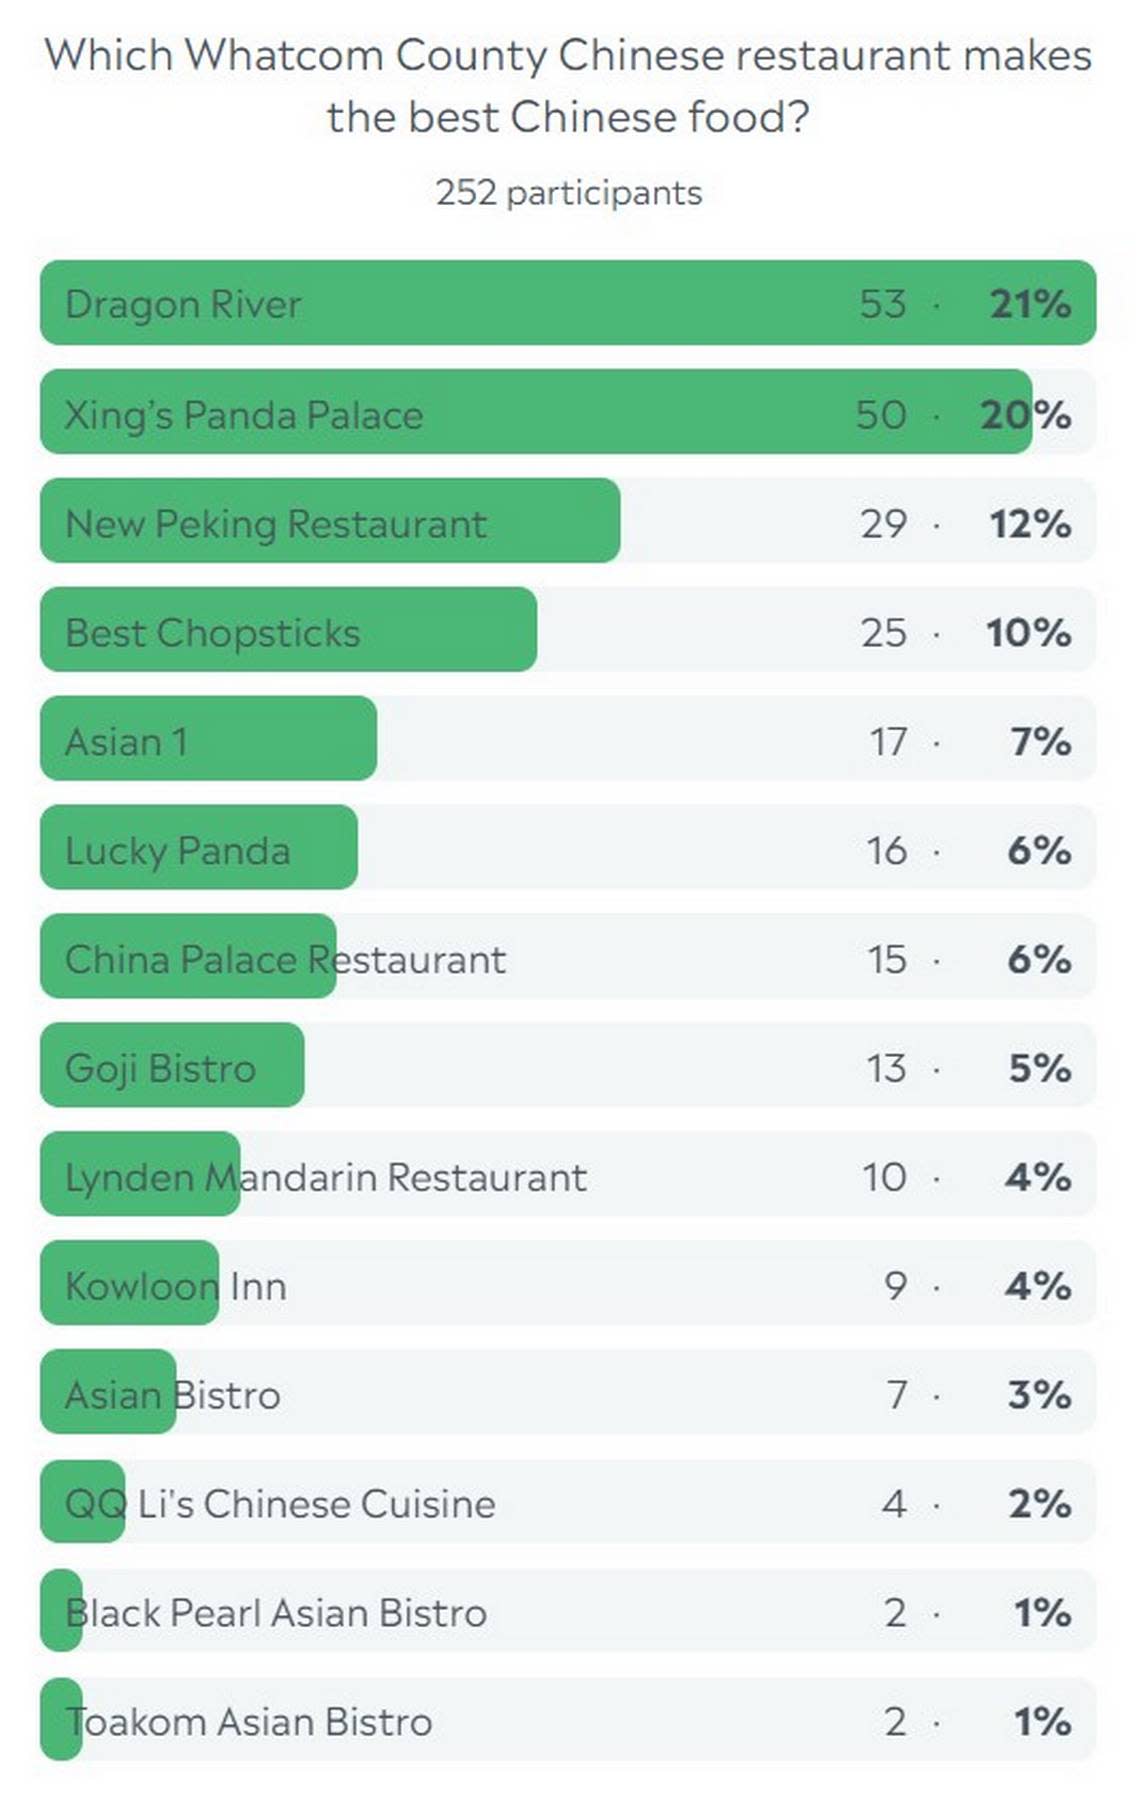 Whatcom County Chinese restaurant reader poll results.